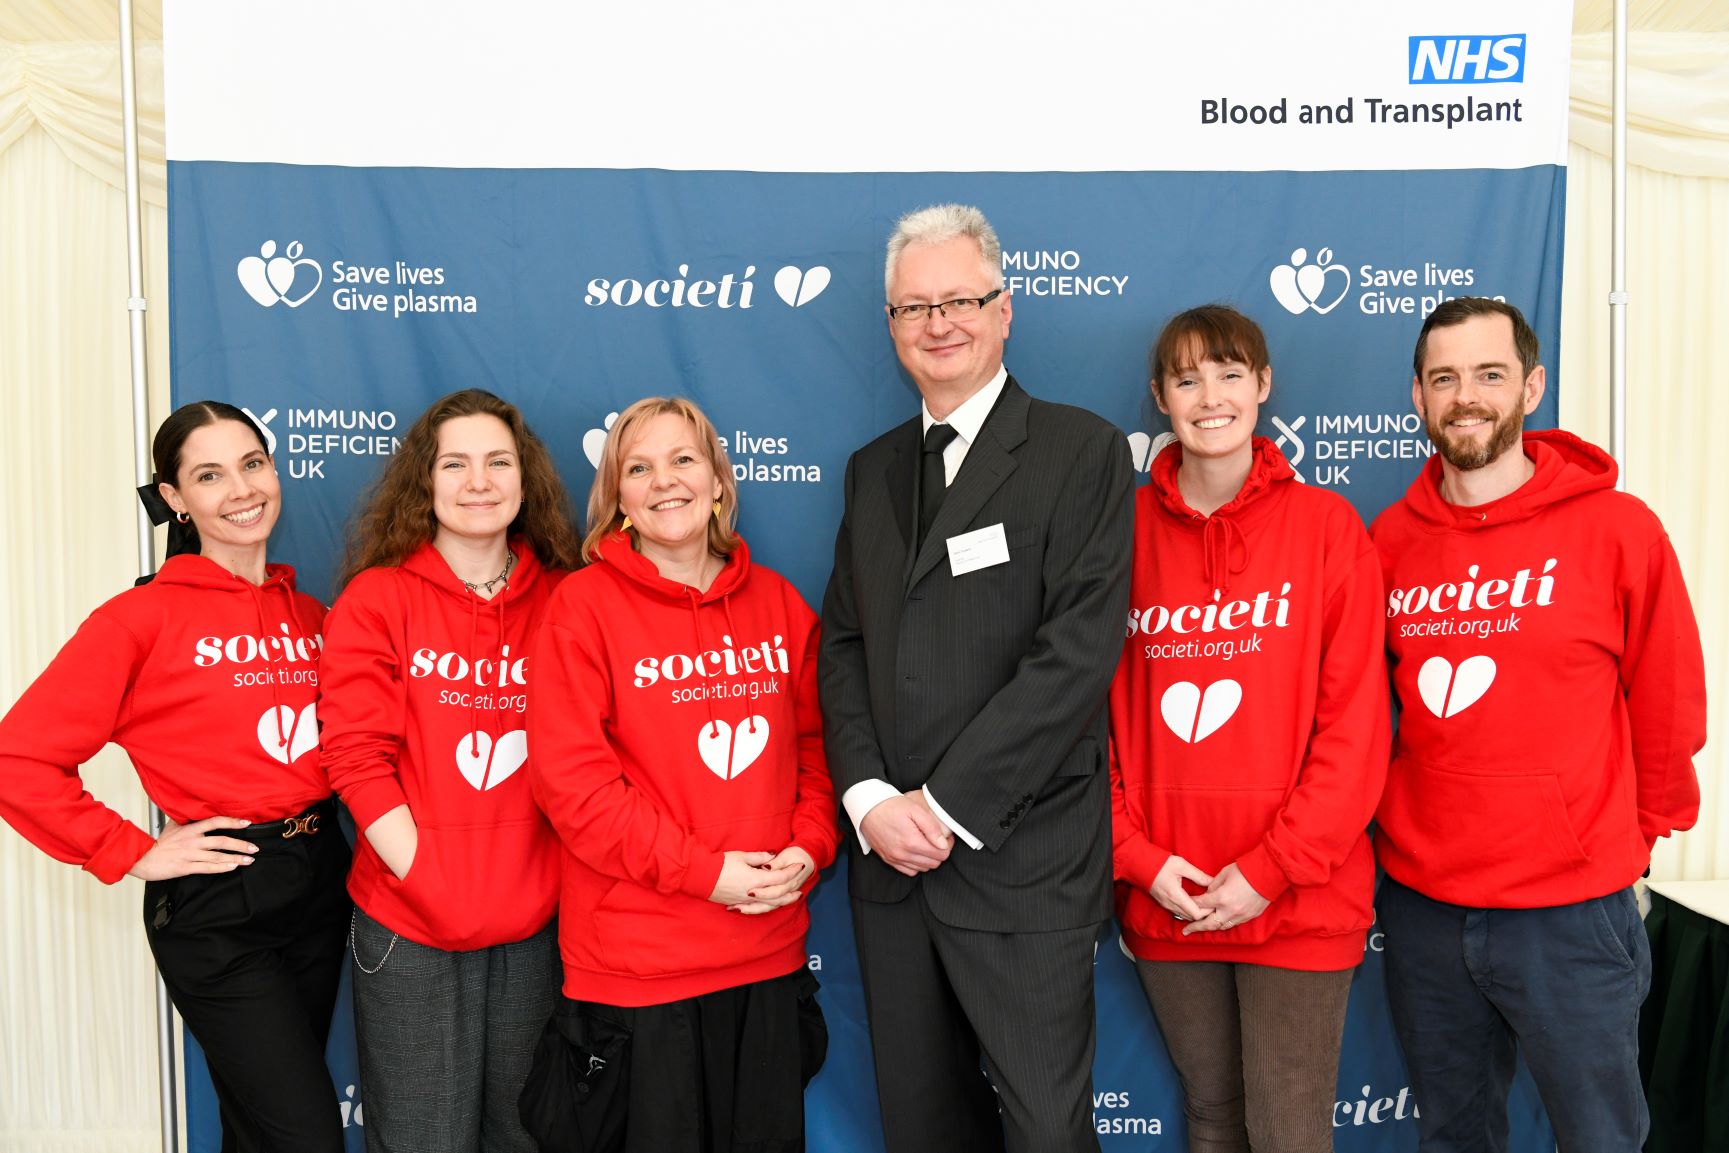 Group photo of Societi team and Gerry Gogarty, Director of Plasma for Medicines